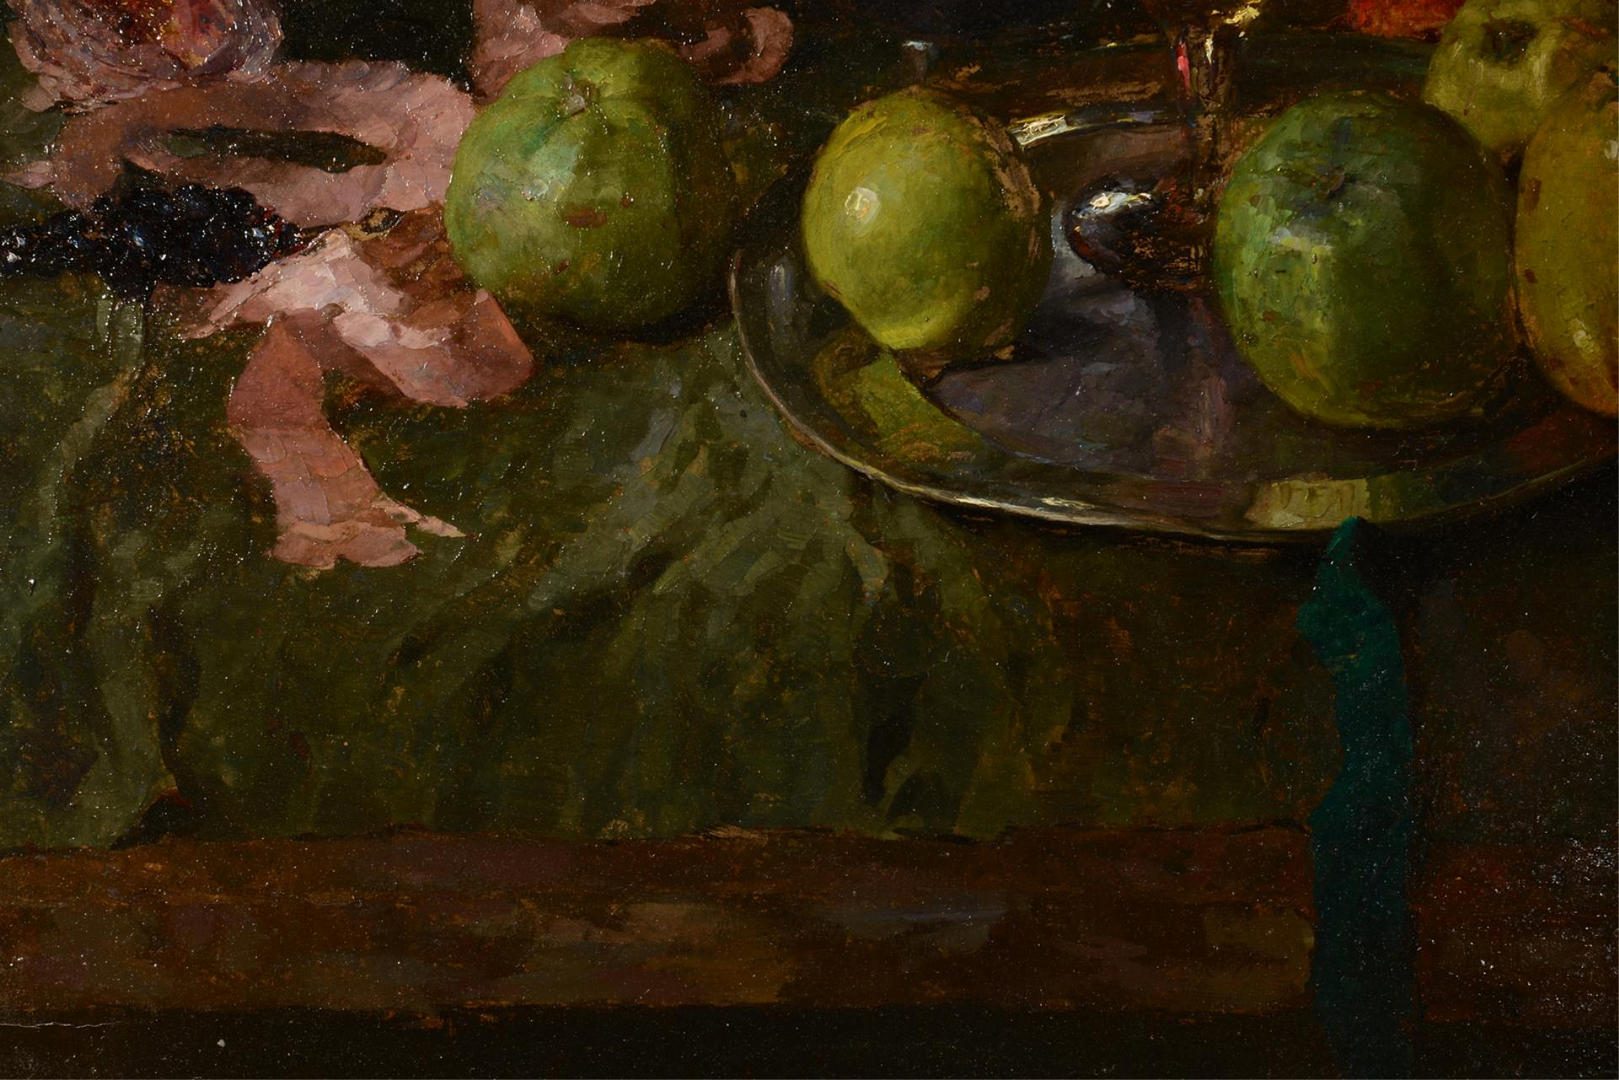 Lot 872: Rene Reinicke, Still Life with Wine and Apples